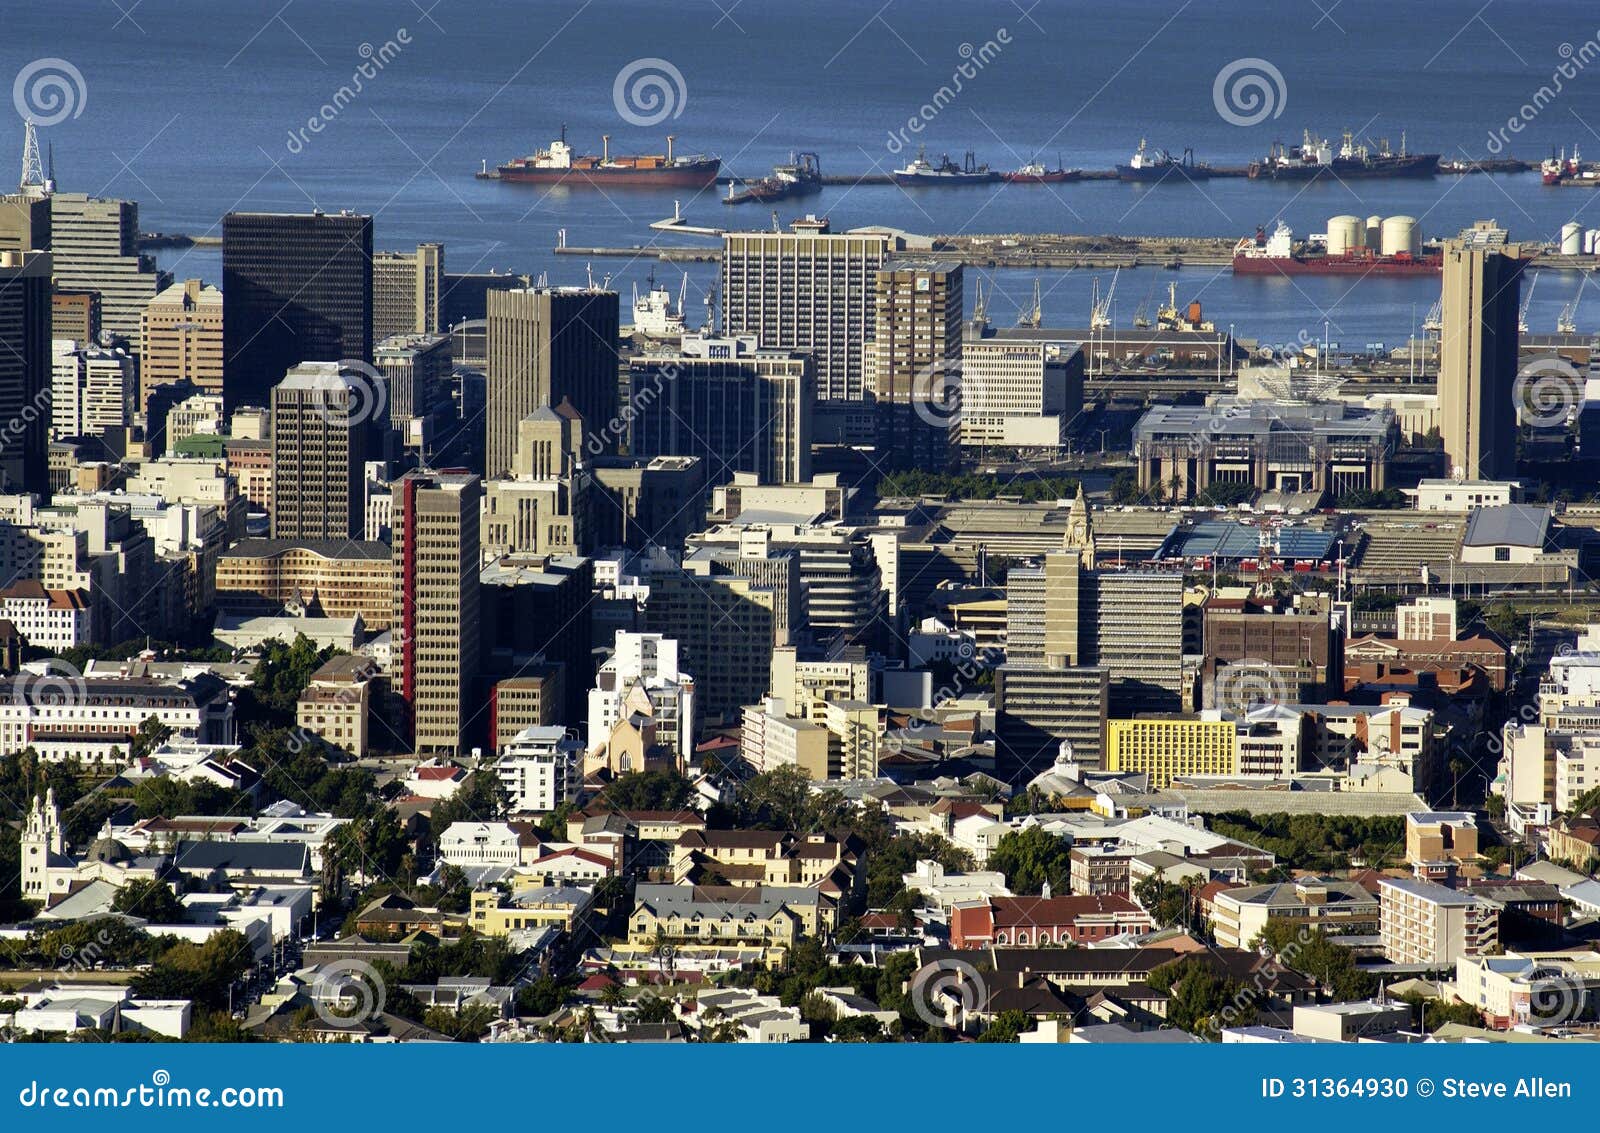 capetown - south africa